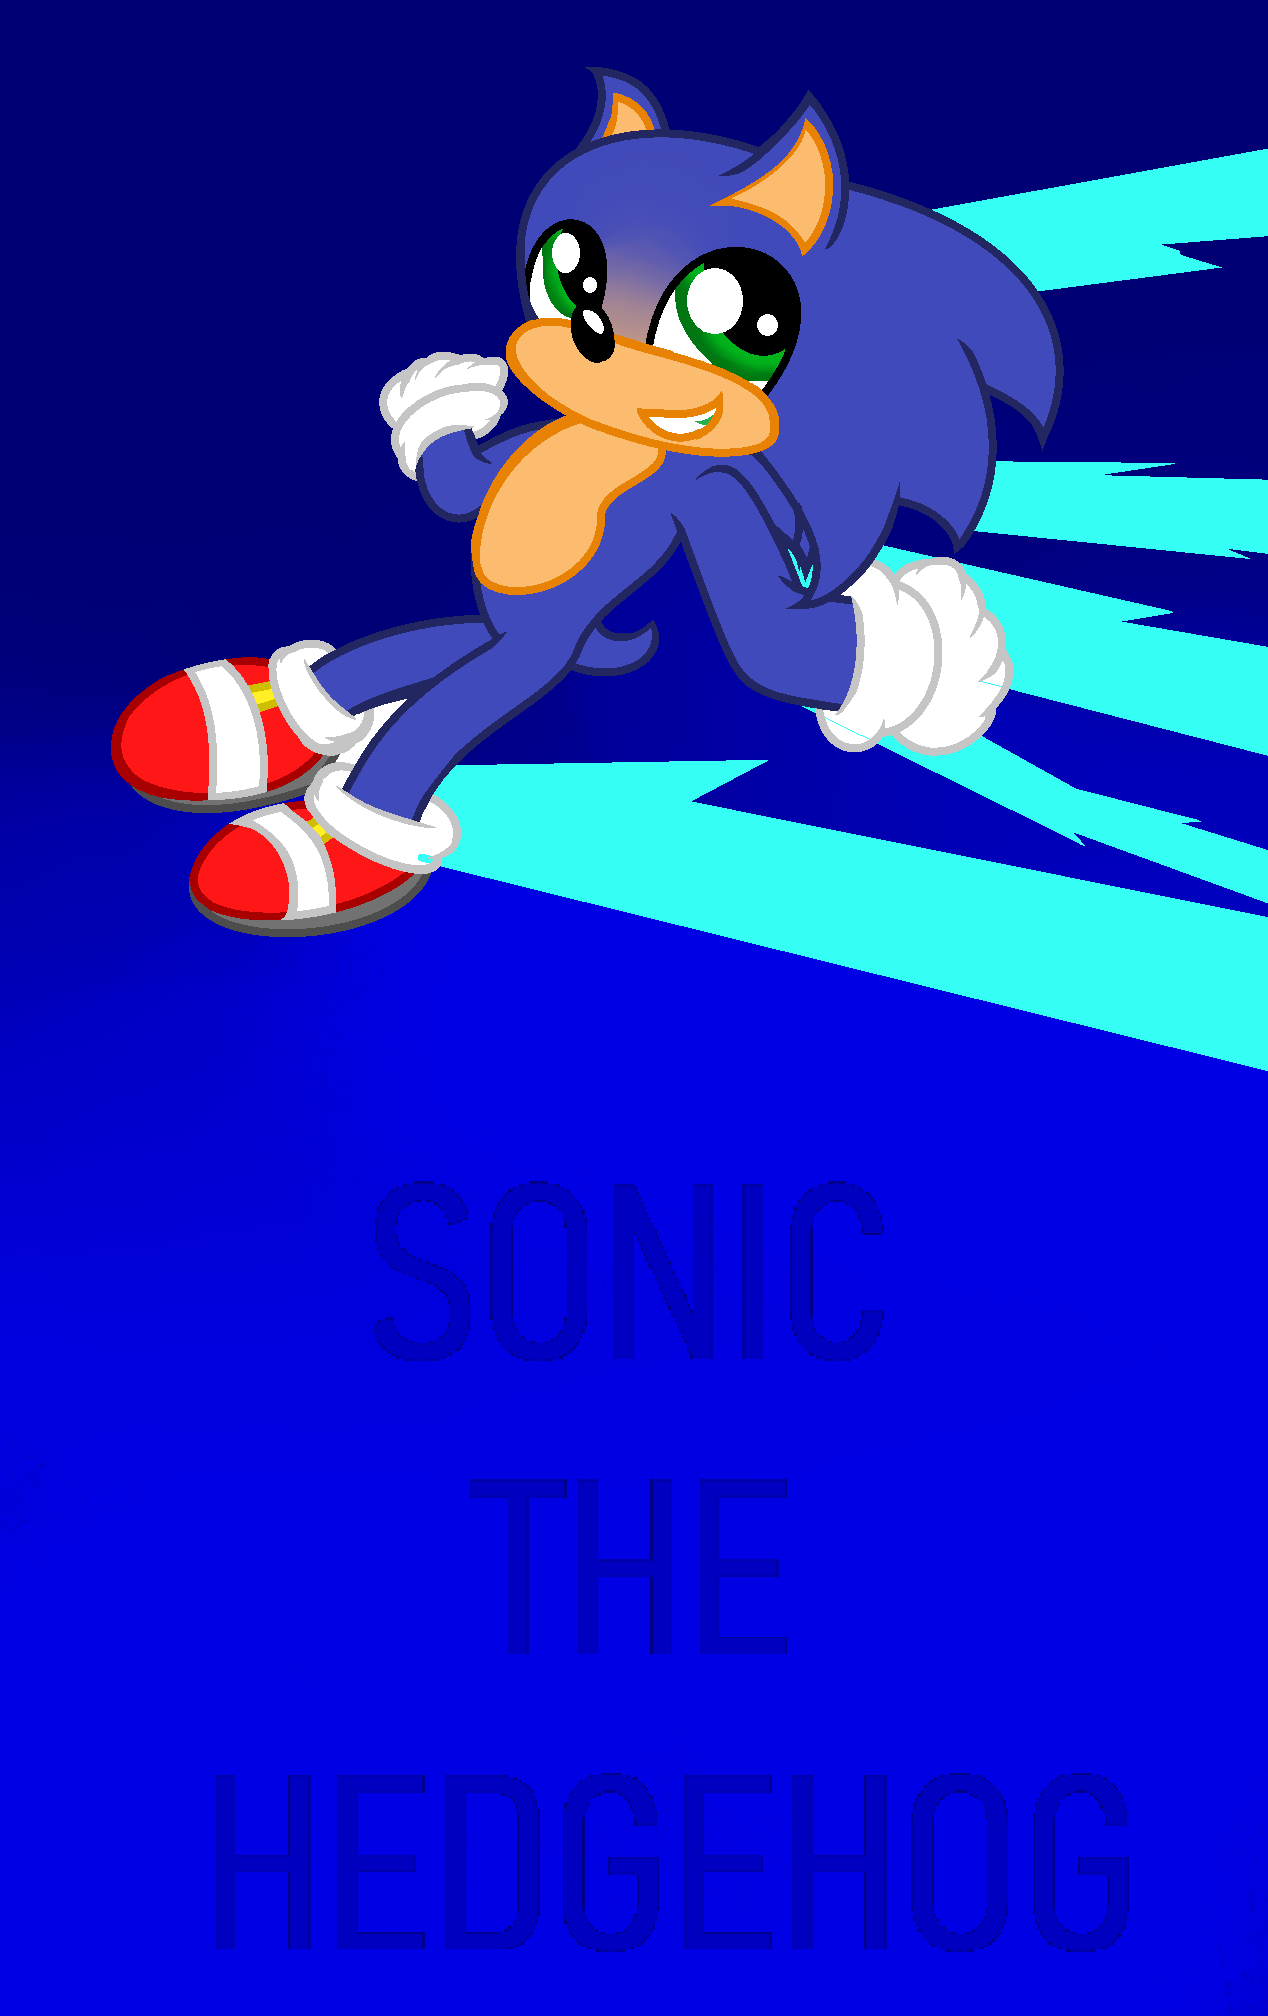 Shadow the Hedgehog coming in the Sonic 3 movie by BeeWinter55 on